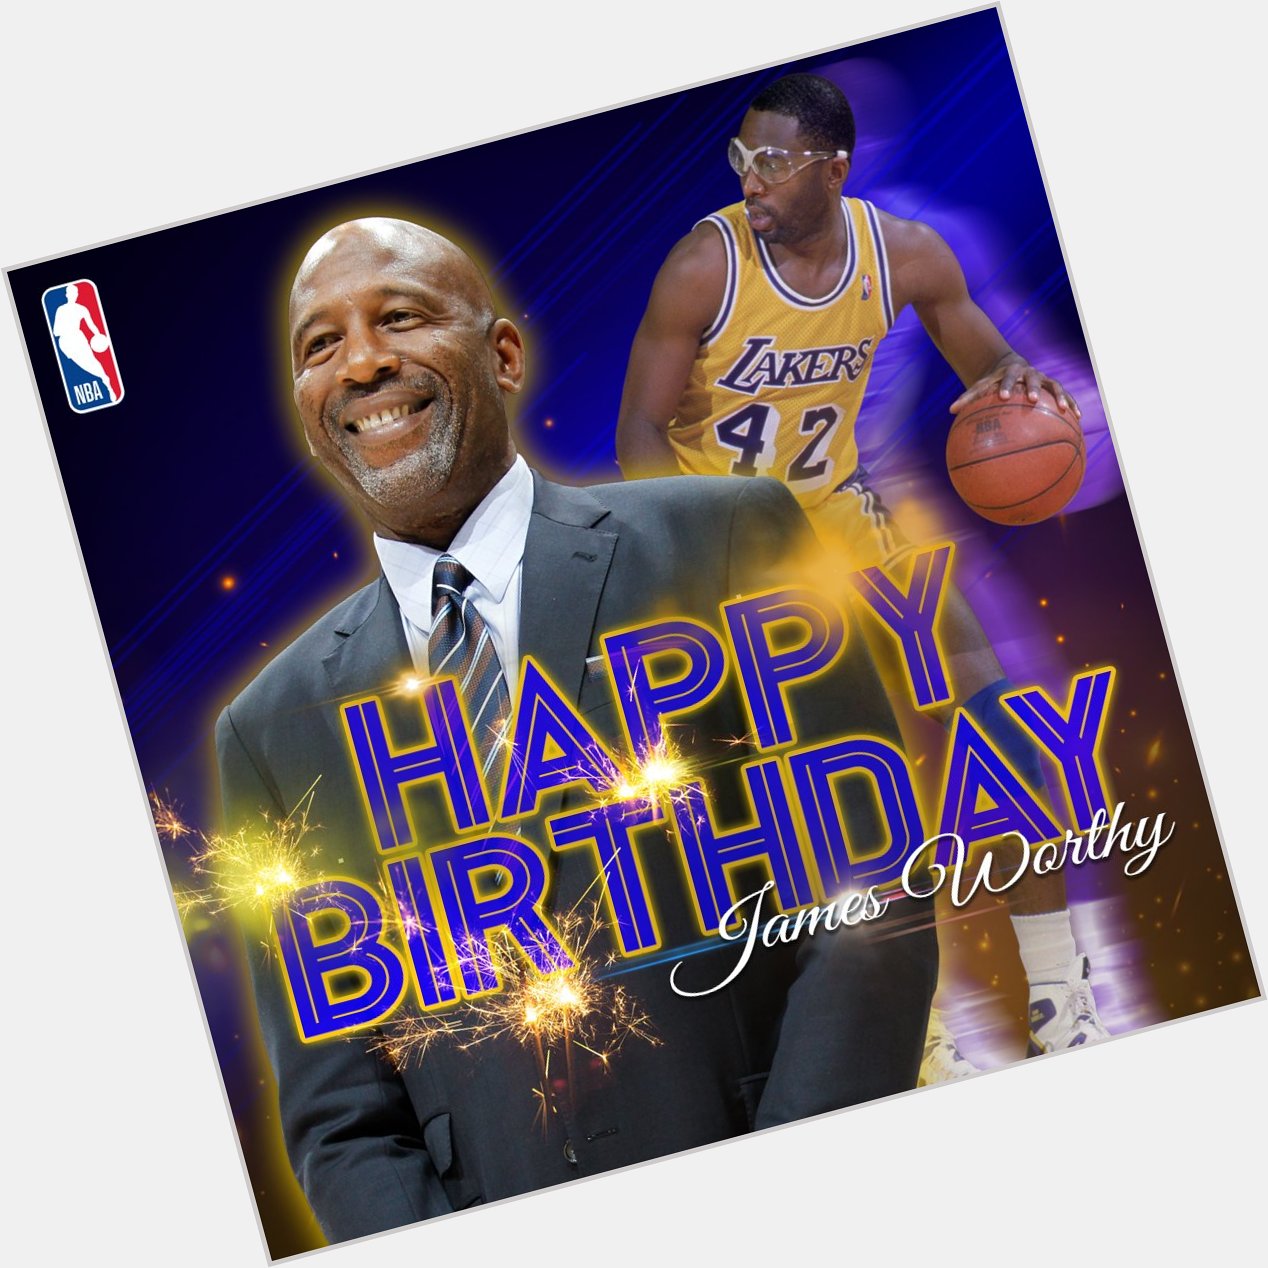 Join us in wishing three-time NBA Champion and seven-time NBA All-Star James Worthy a happy birthday! 